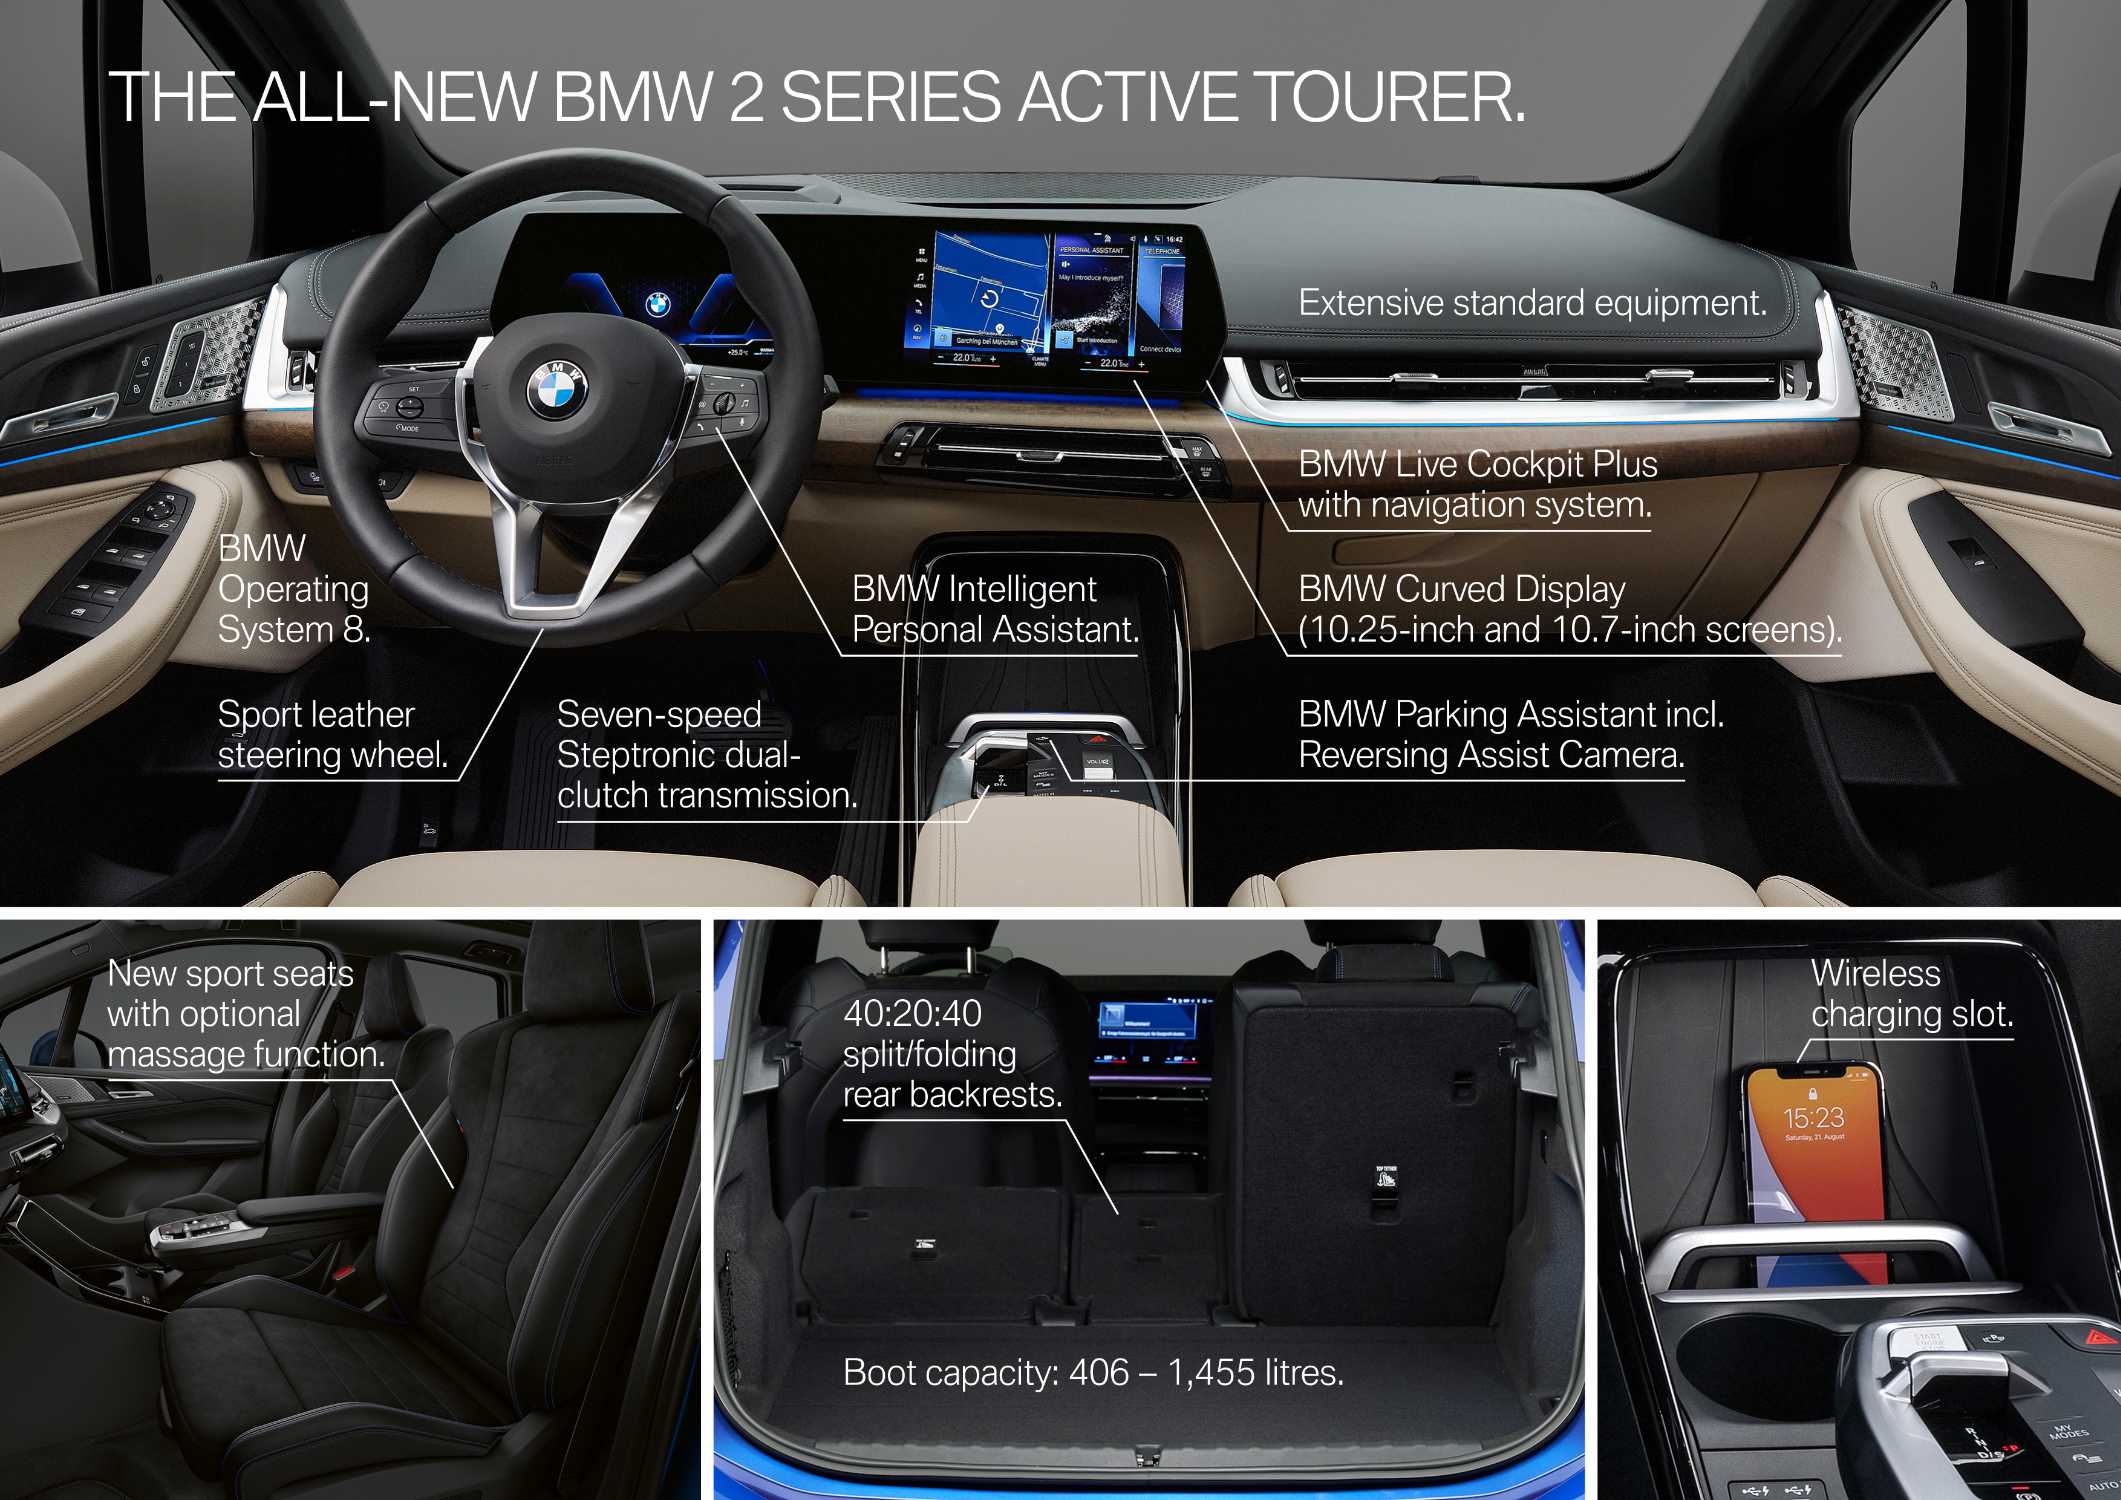 The all-new BMW 2 Series Active Tourer - Highlights (10/2021).